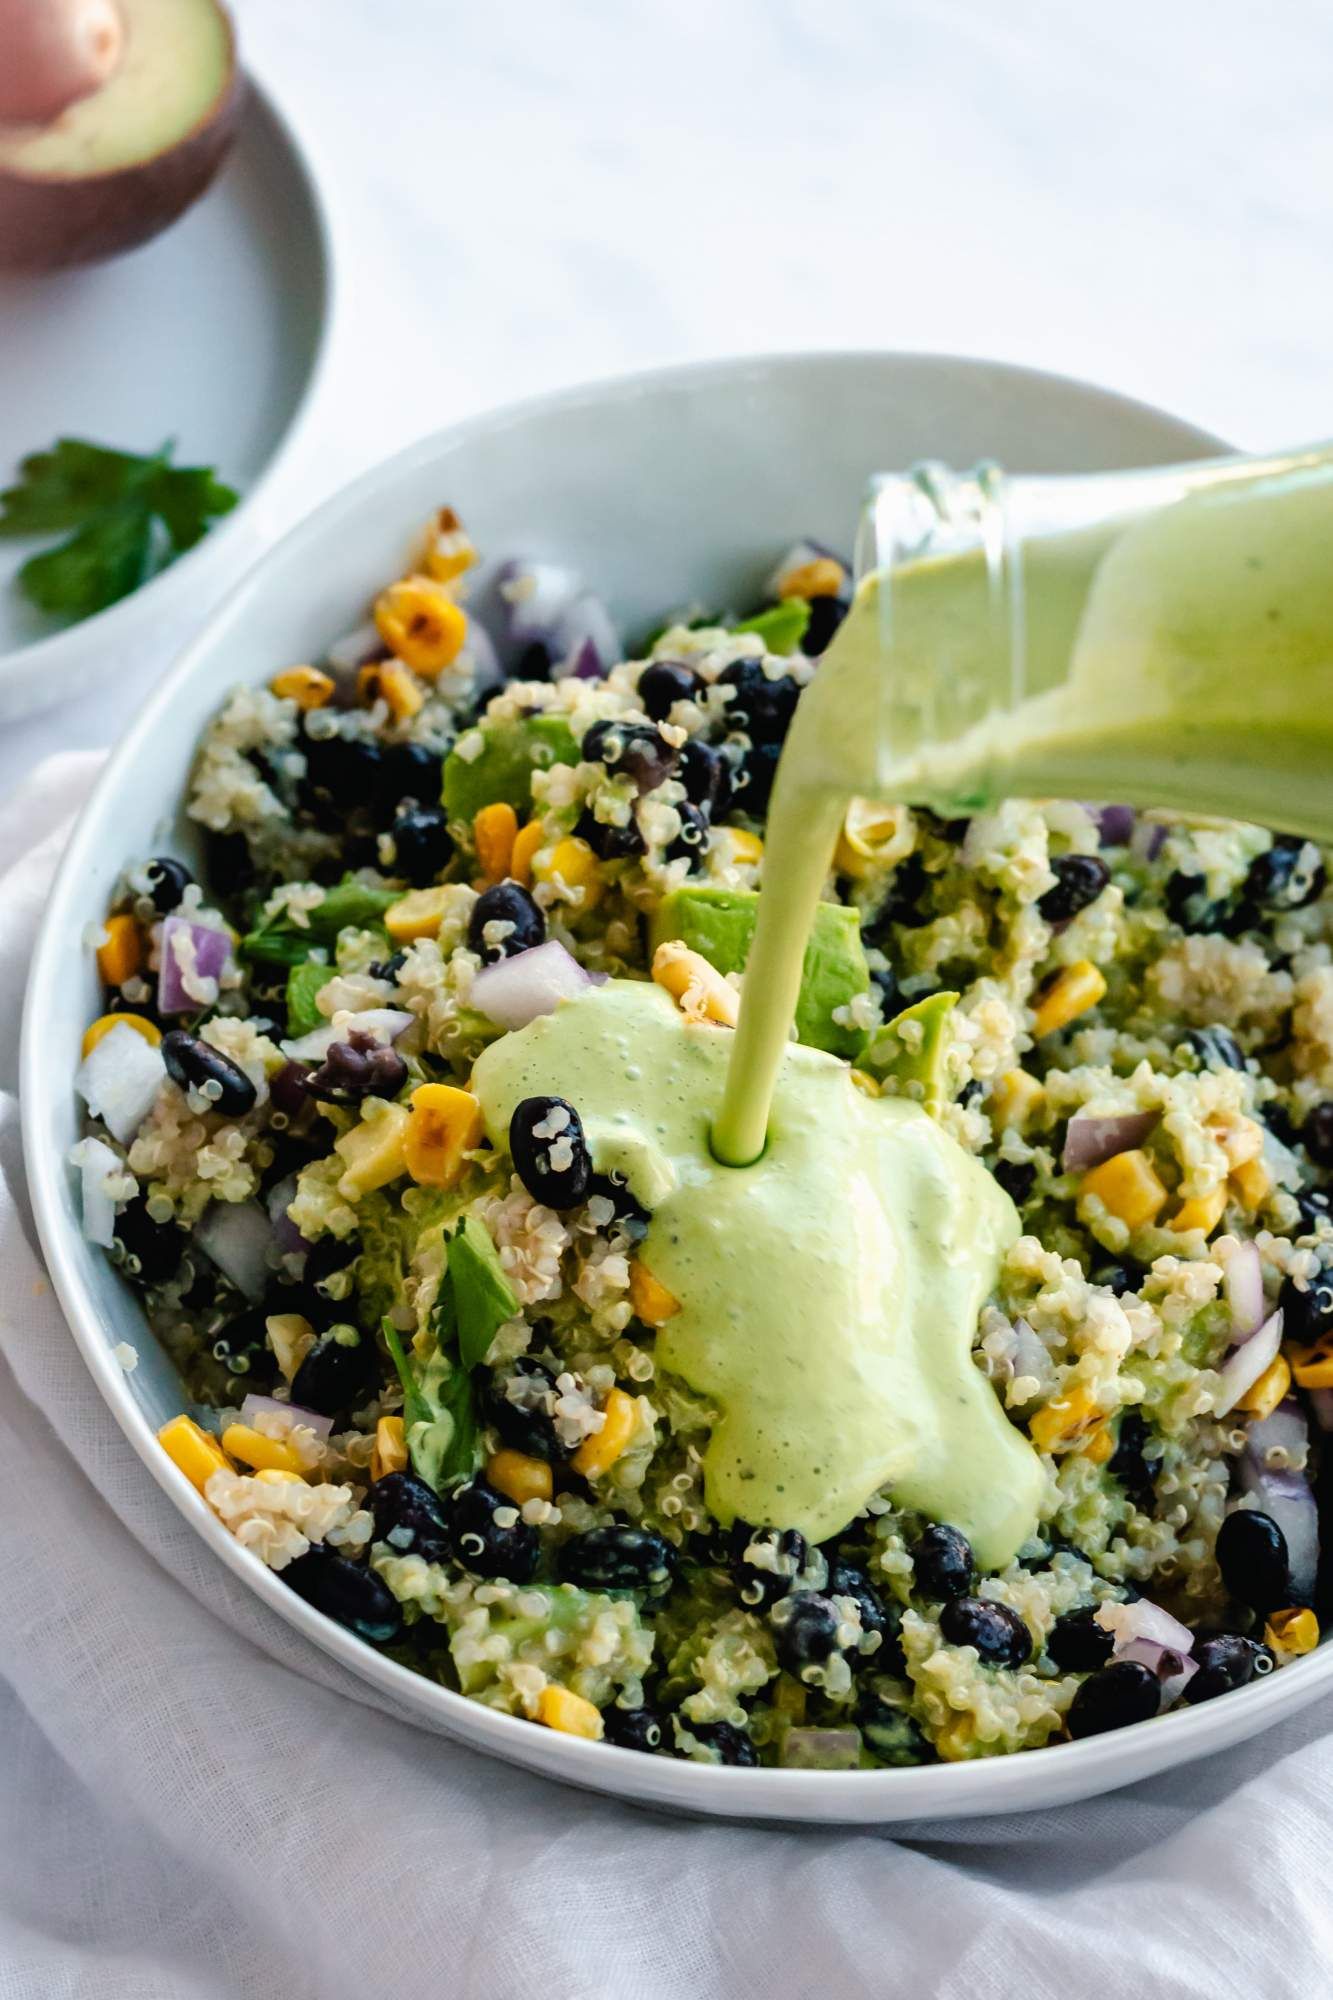 Avocado cilantro dressing being poured on a quinoa and black bean salad in a white bowl.